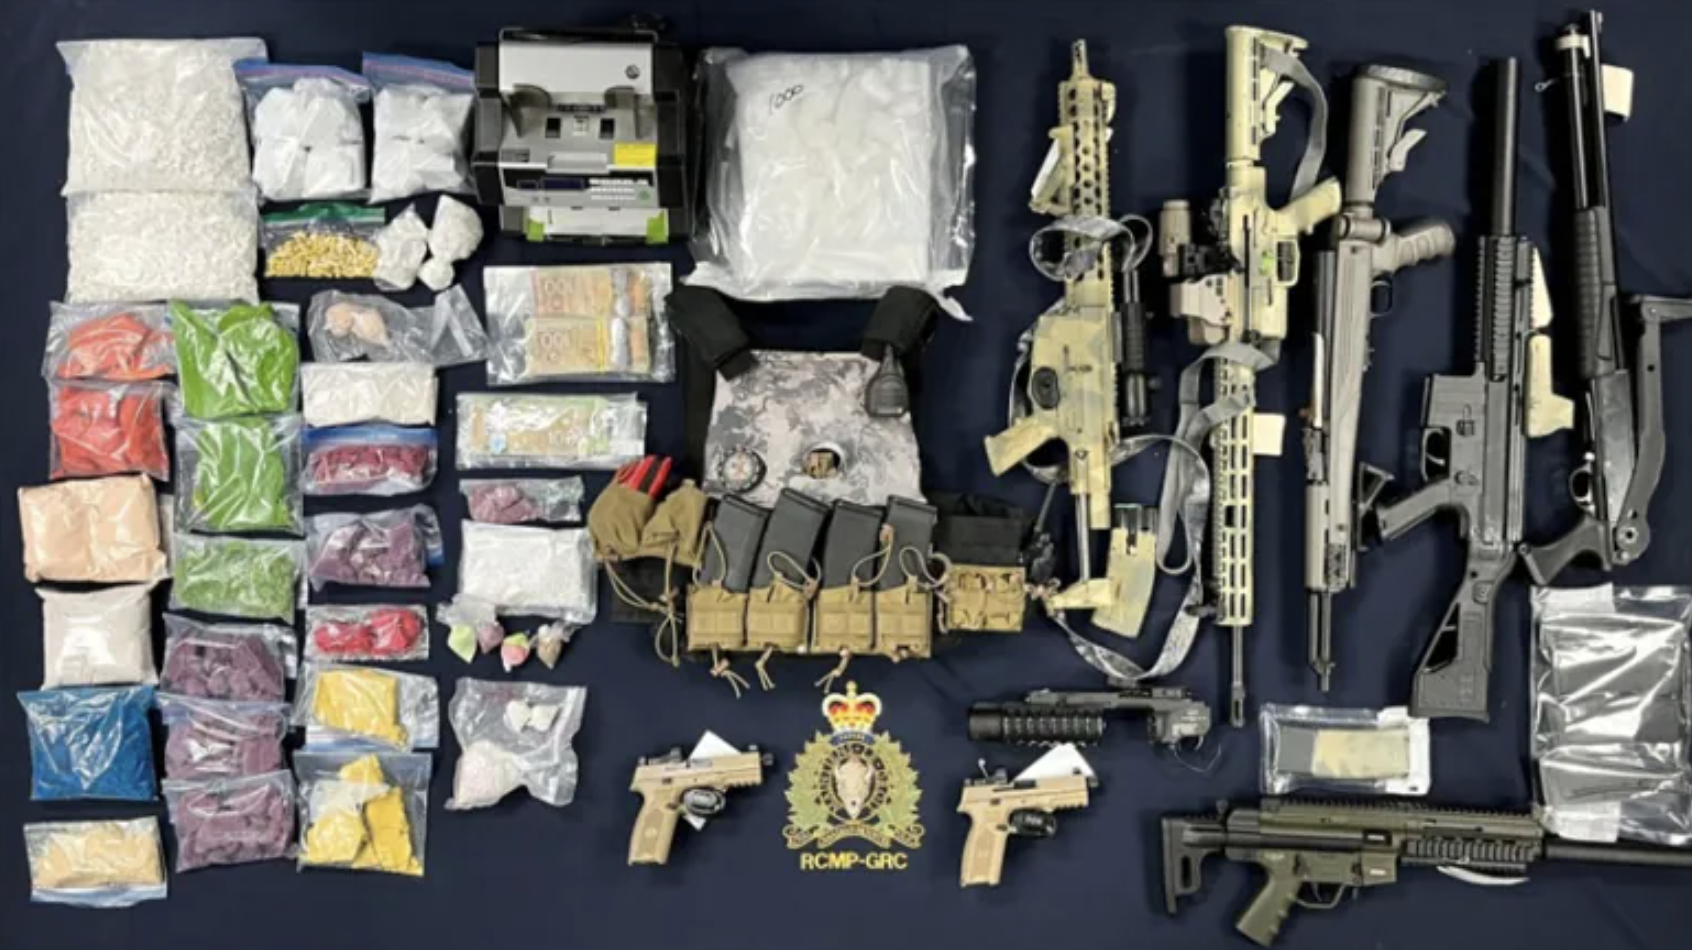 'Significant quantities' of drugs and weapons were seized during the execution of three search warrants, November 2022. (RCMP)